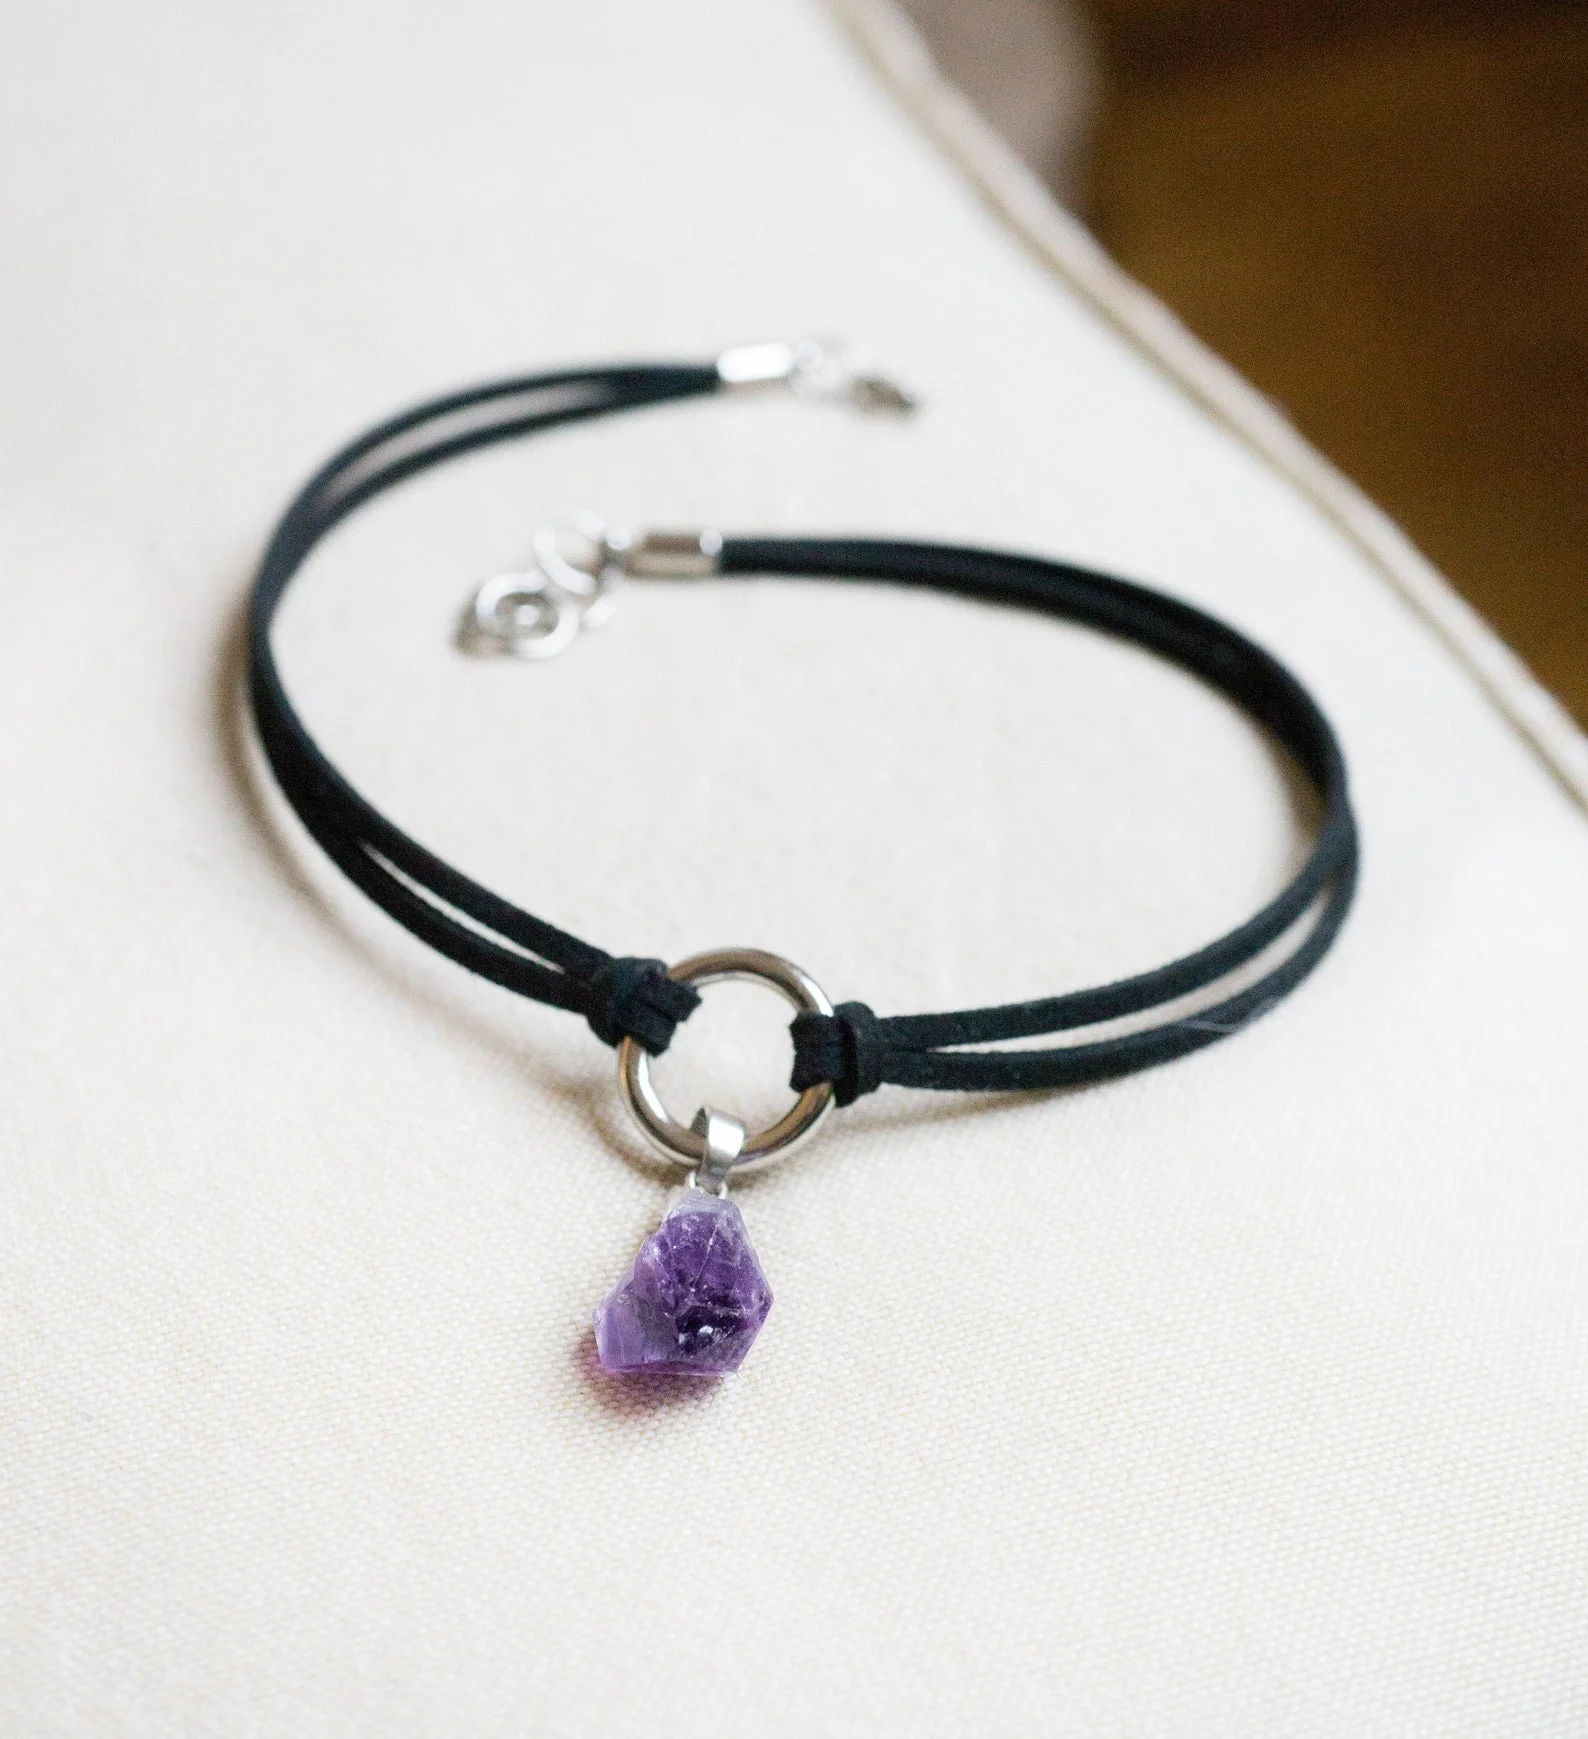 Amethyst Choker Necklace, Raw Crystal Choker Pendant, Gemstone Jewelry Healing Crystals and Stones